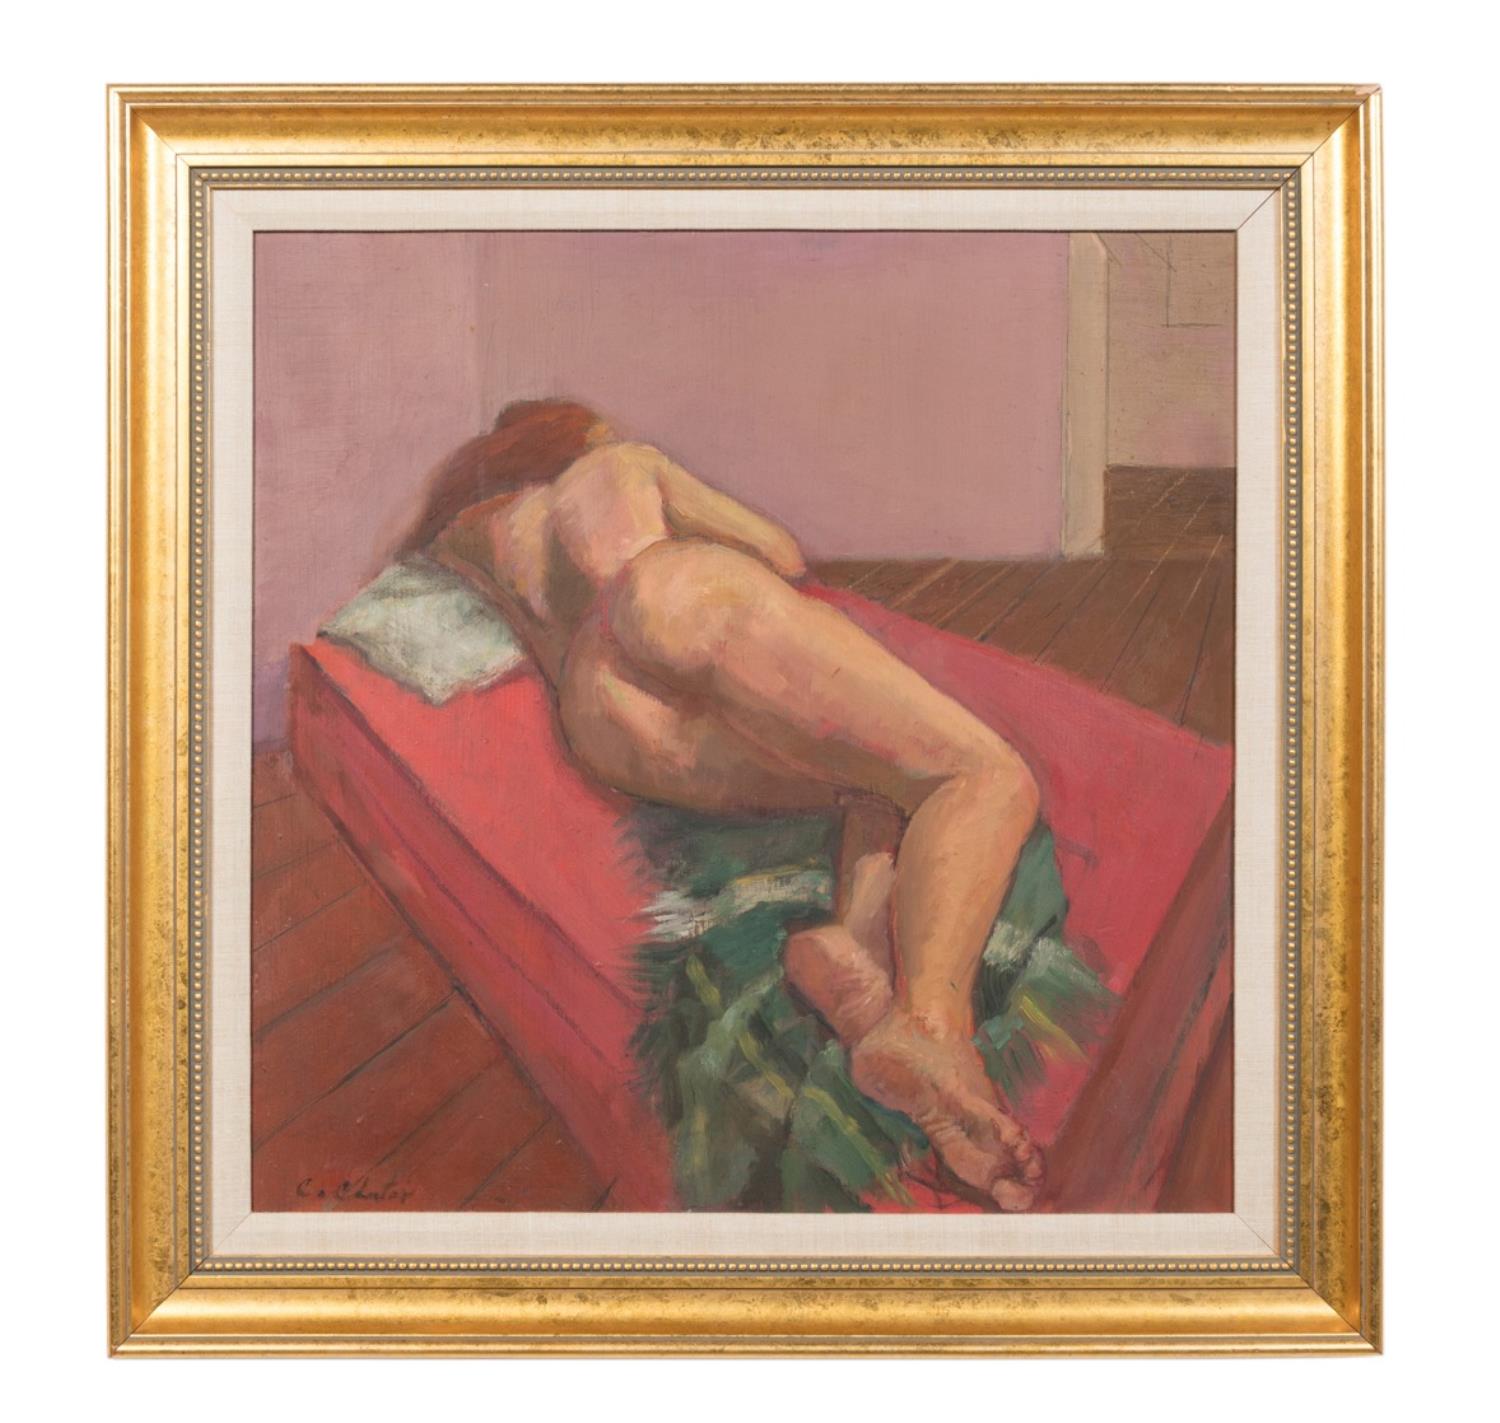 CONSTANTIN CHATOV NUDE ON RED 2bfe37